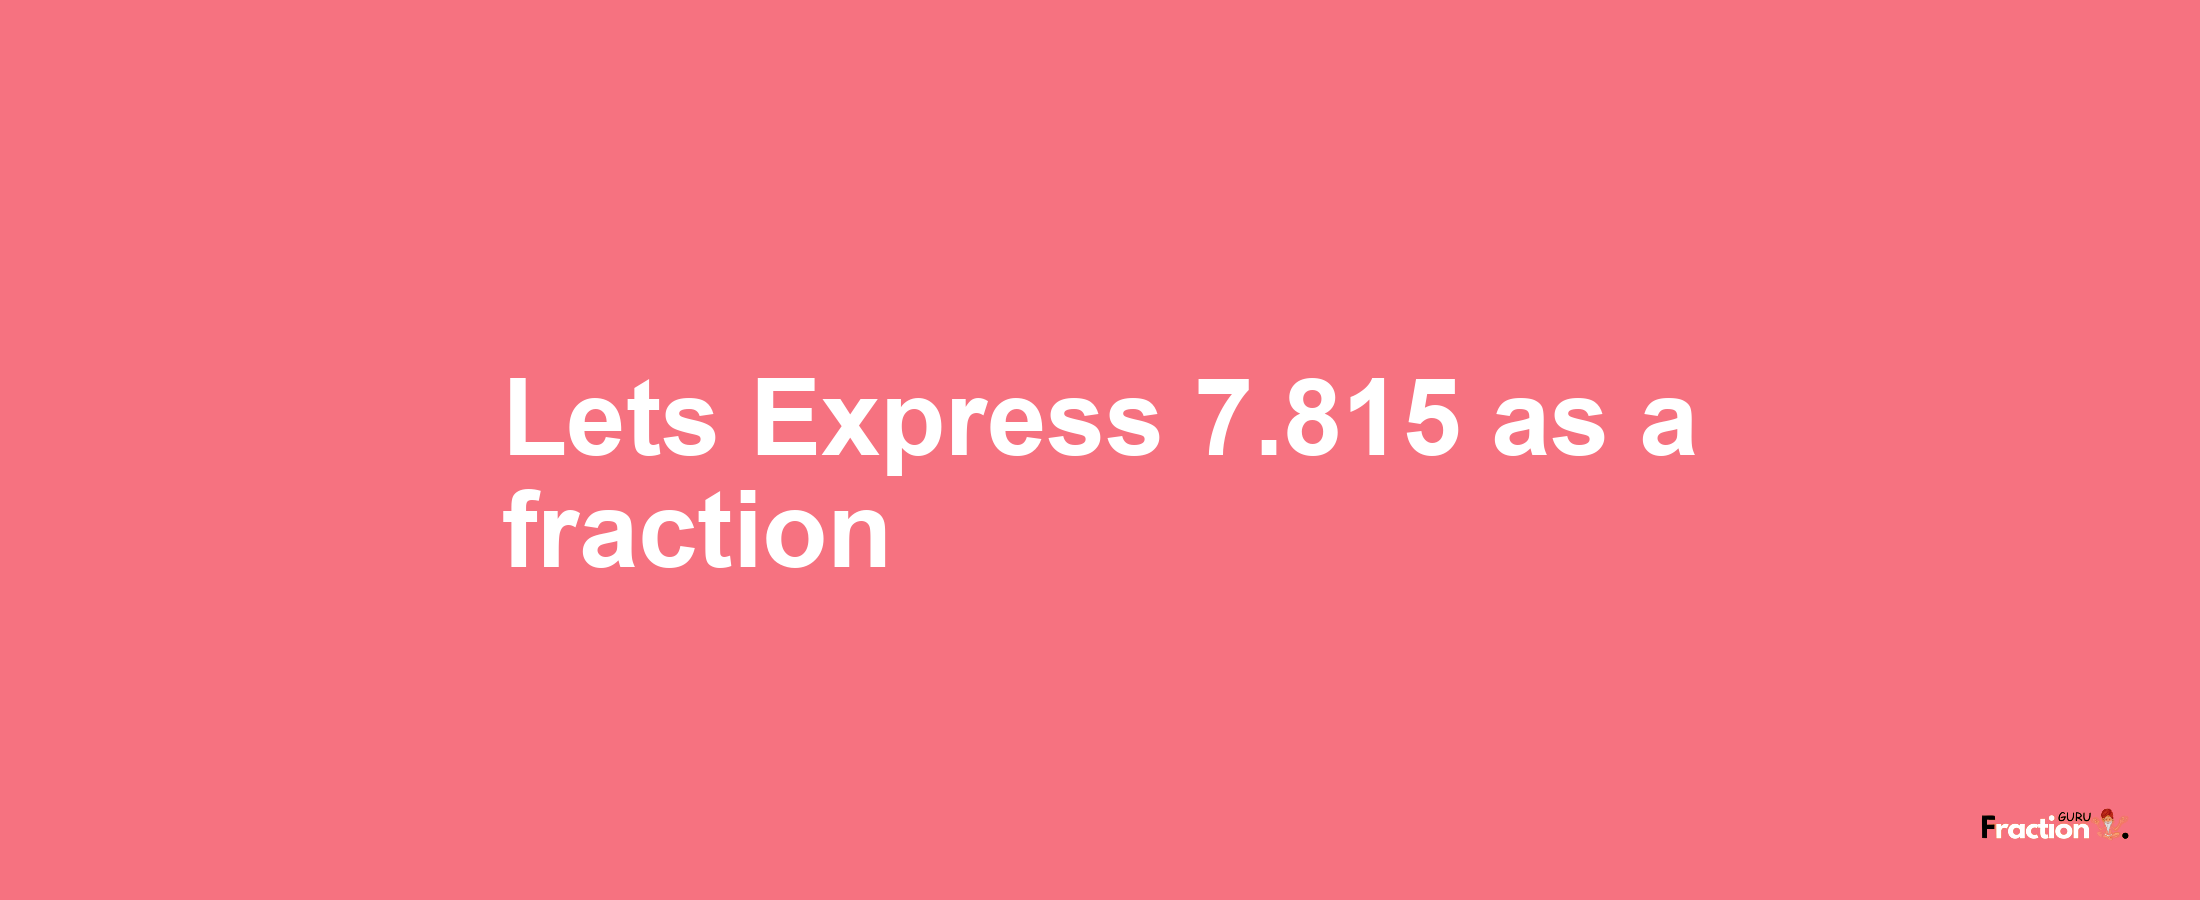 Lets Express 7.815 as afraction